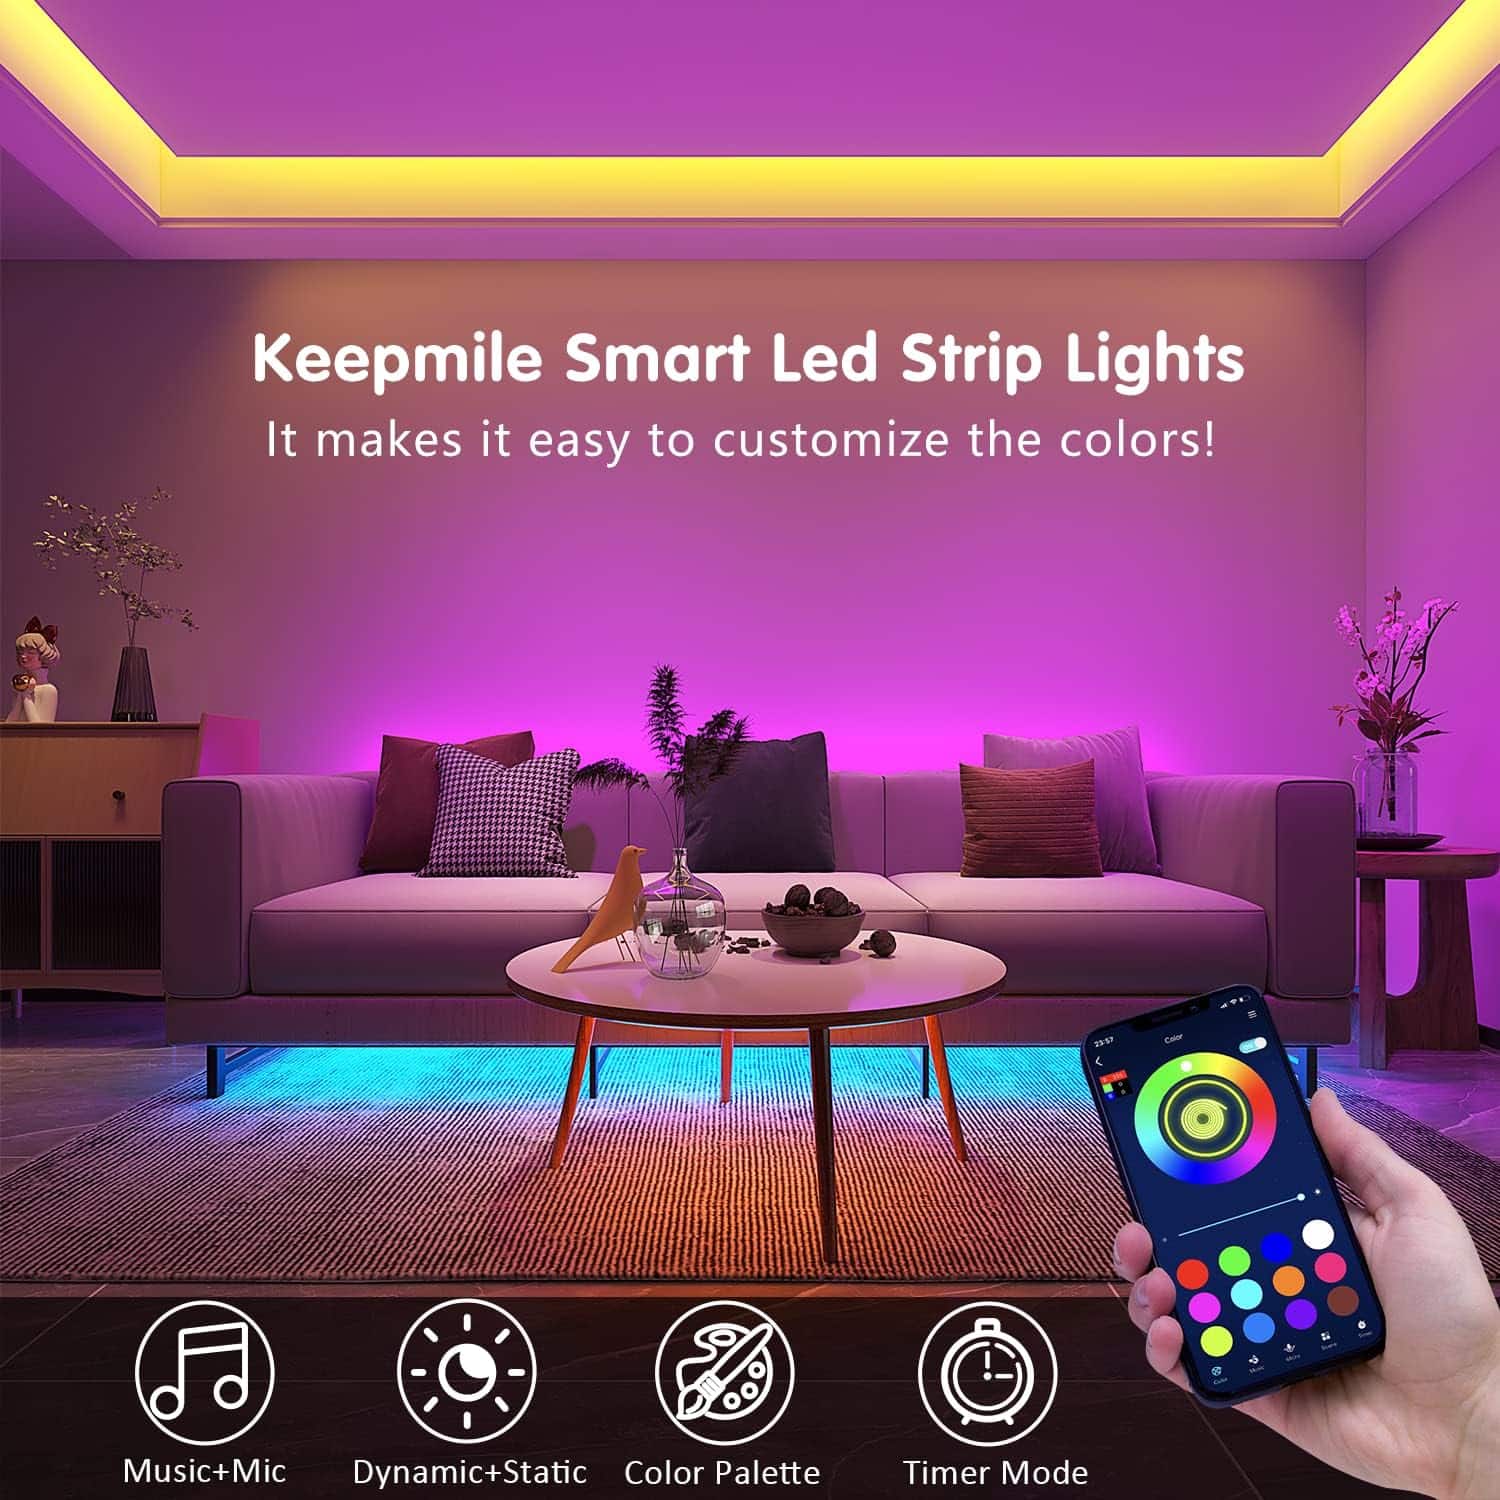 Keepsmile 100ft Led Strip Lights Review: Transform Your Space with Vibrant Colors